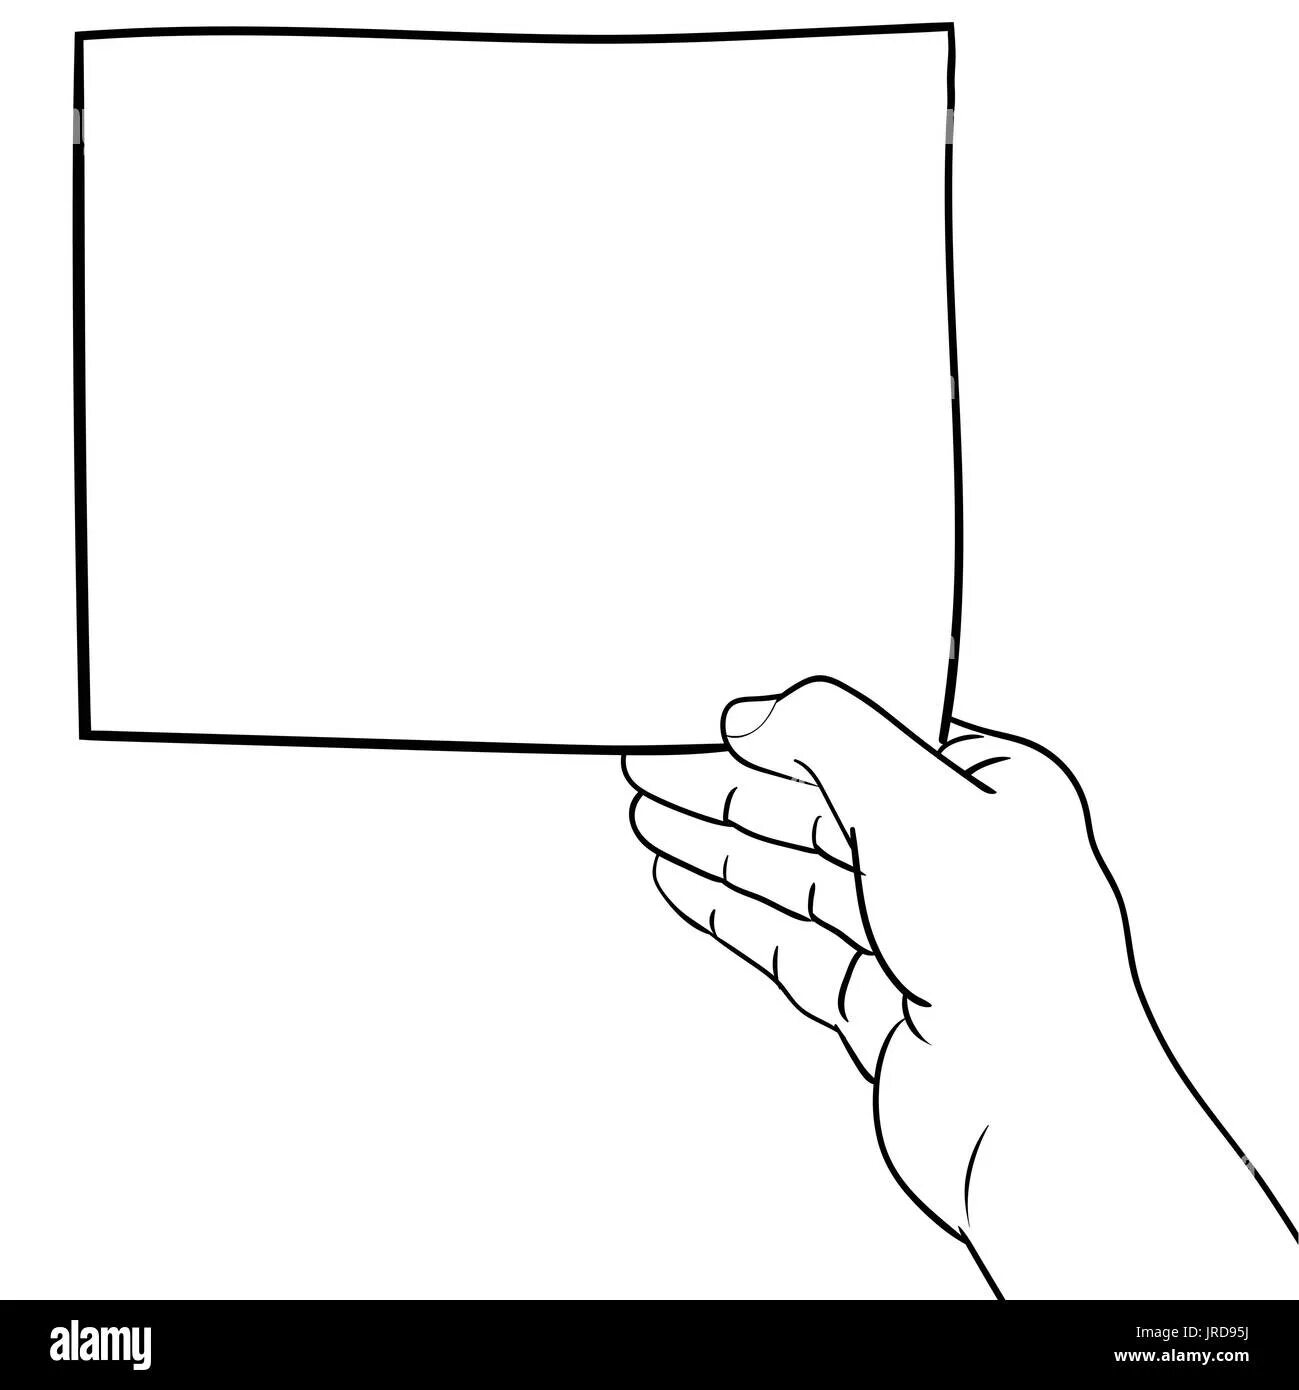 Amazing blank slate coloring page